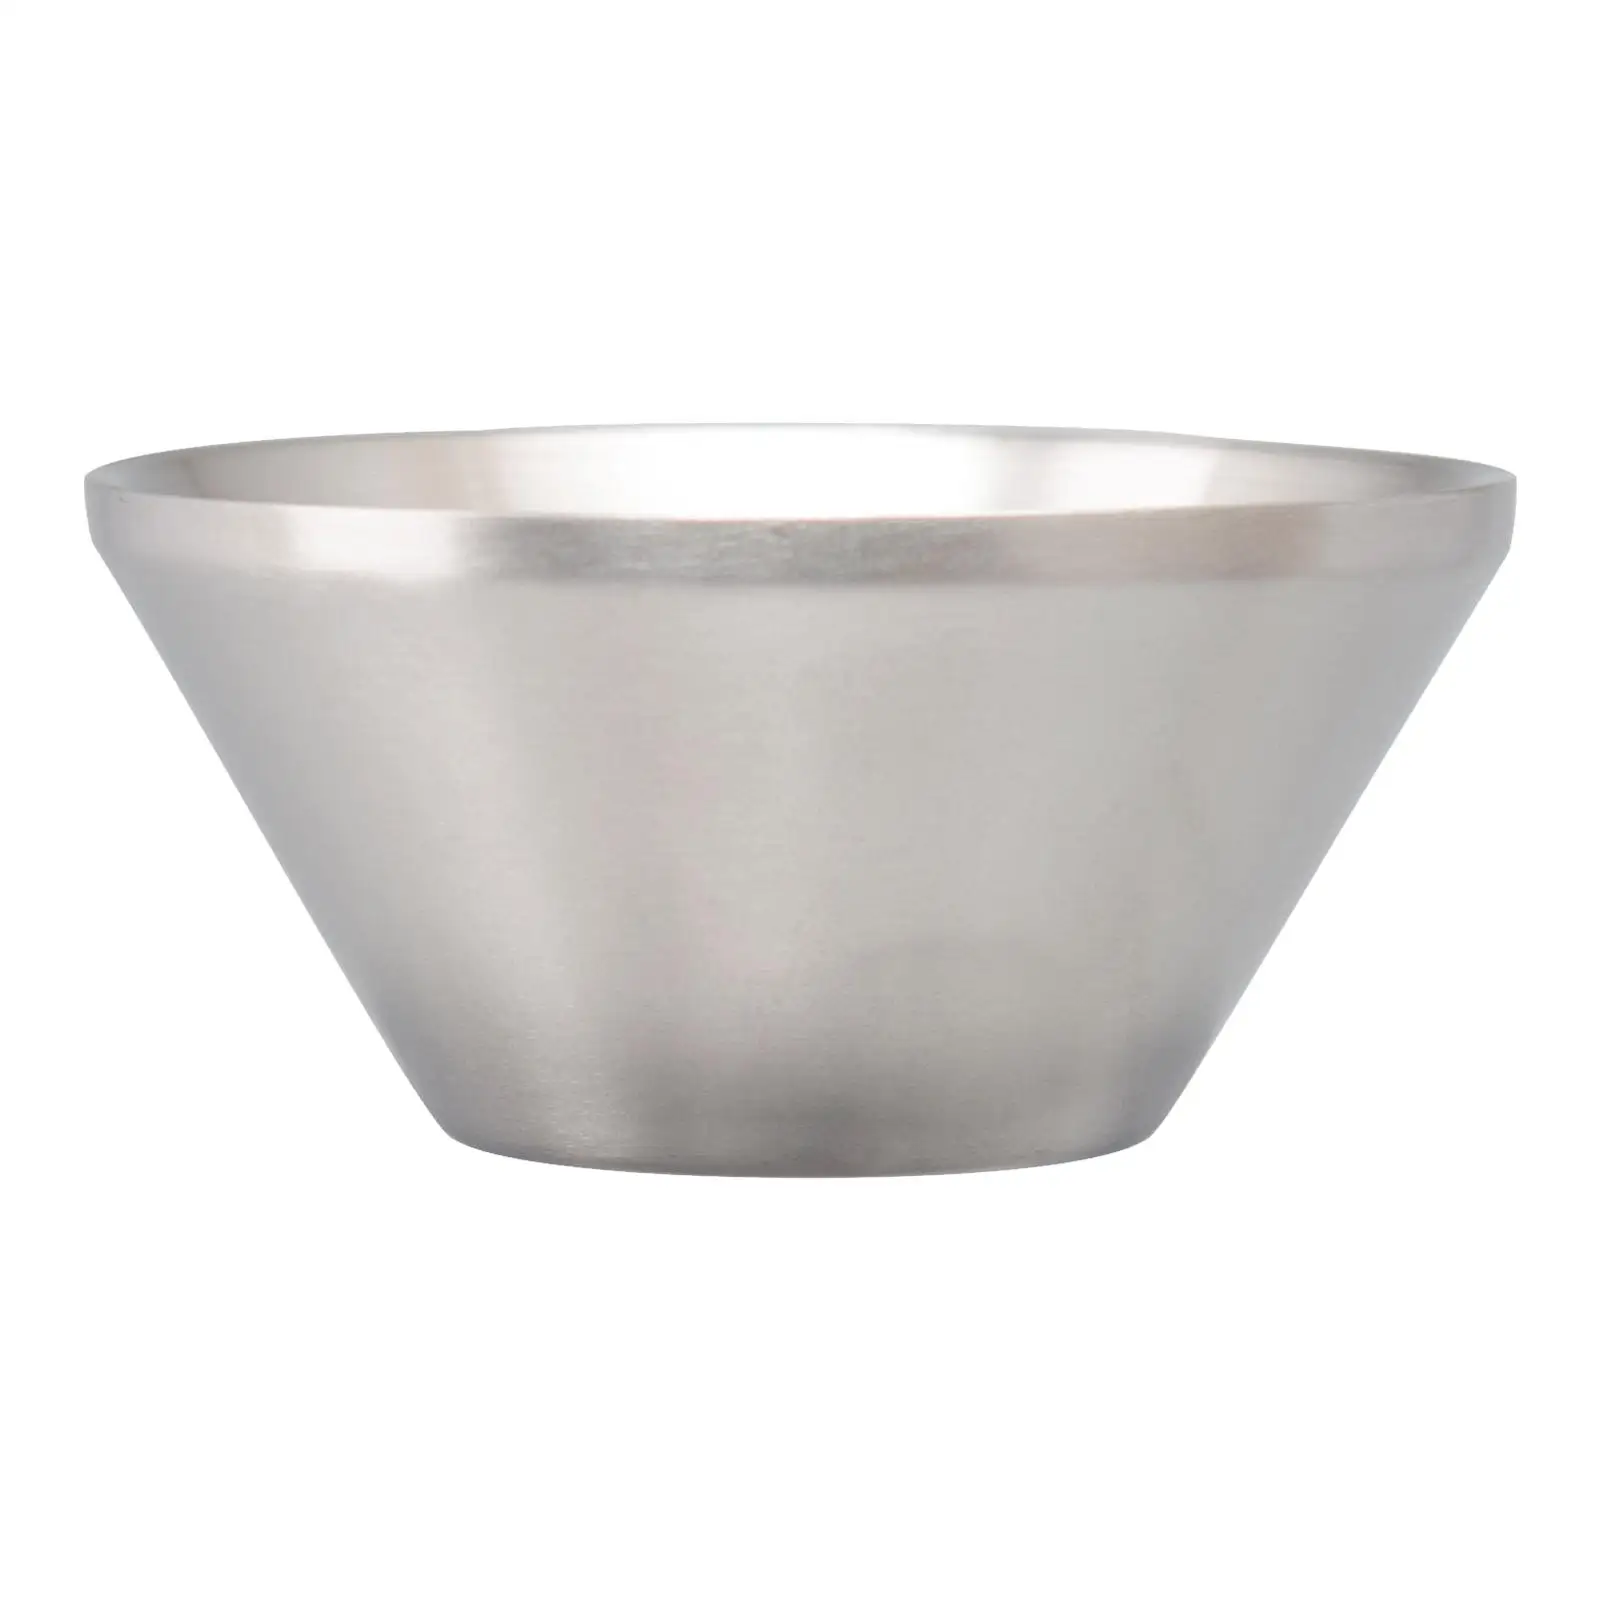 Stainless Steel Shaving Bowl Shave Soap Cup Smooth Tactile Texture Shaving Lather Bowl Provides A Luxurious Shave Experience